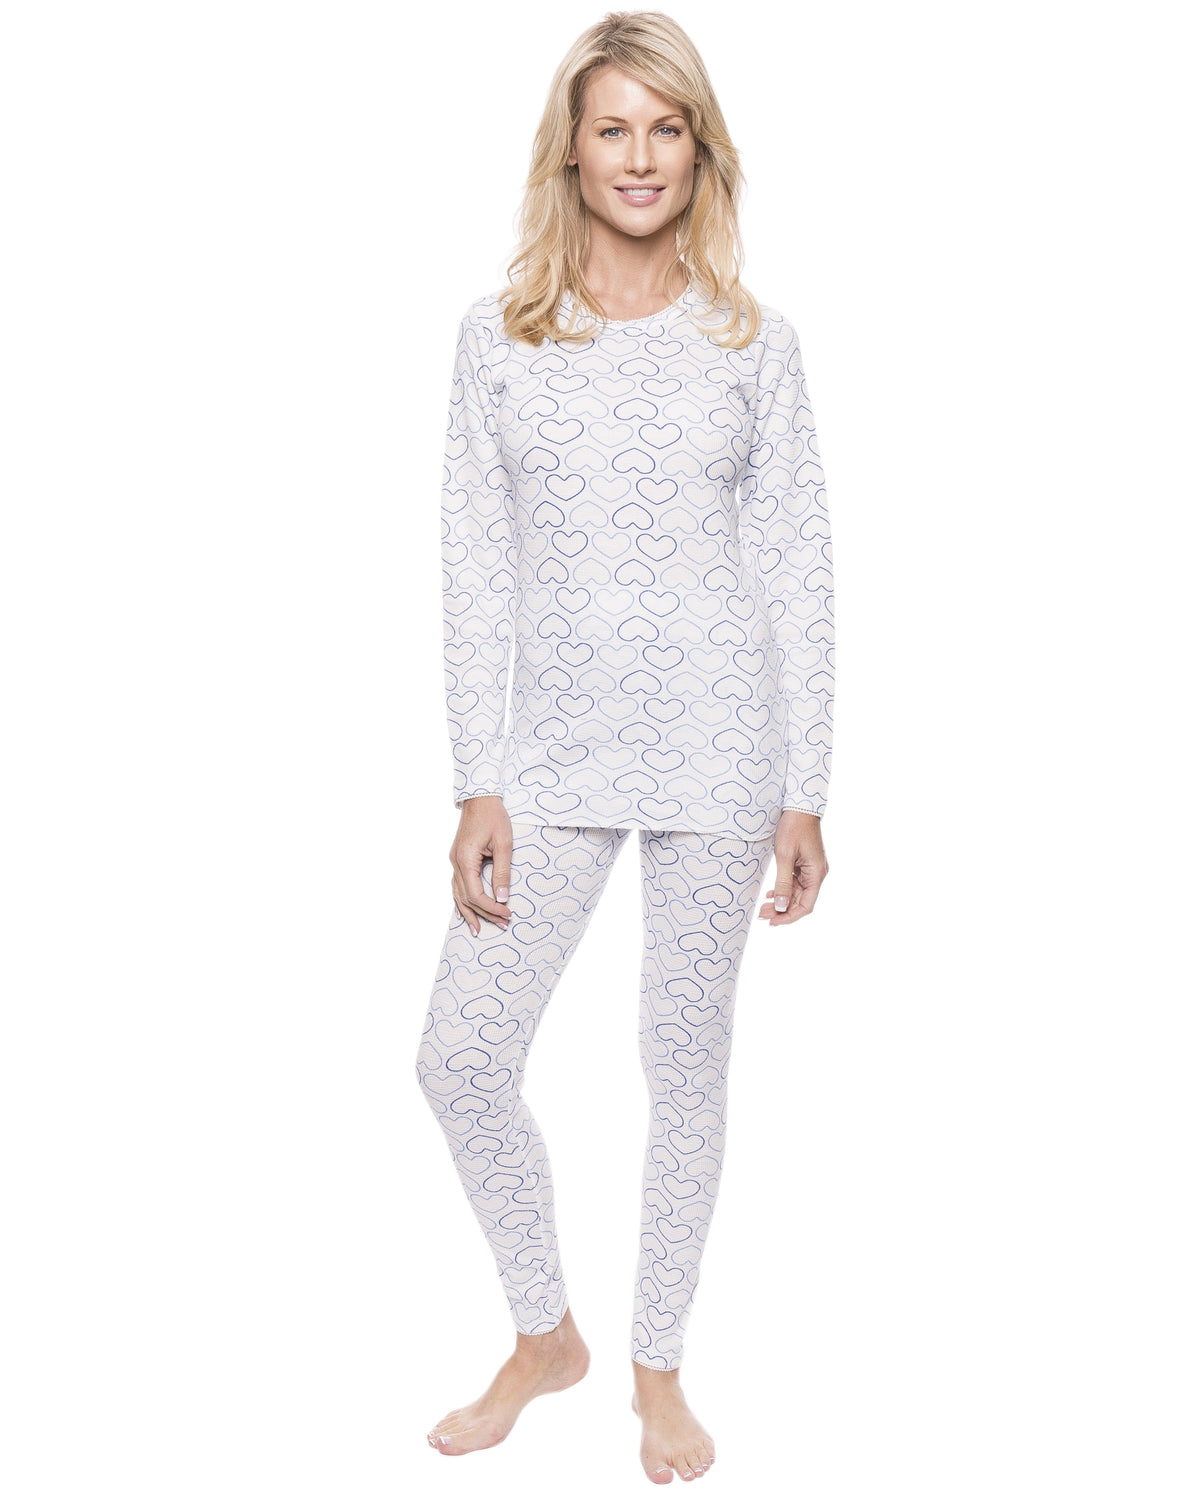 Womens Printed Extreme Cold Waffle Knit Thermal Top and Bottom Set - Tile of Hearts White/Blue